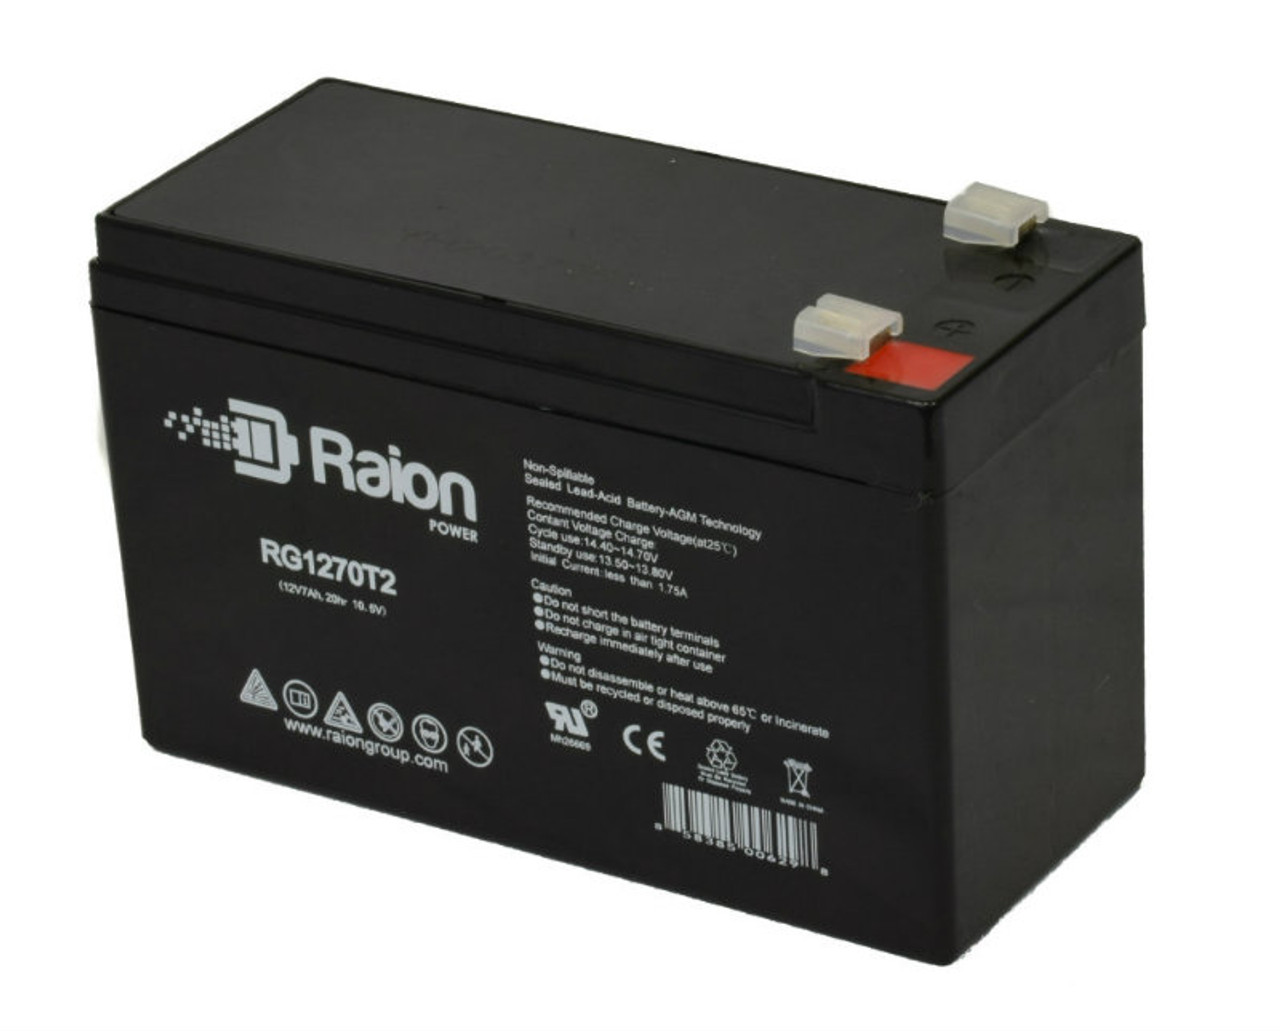 Raion Power RG1270T1 12V 7Ah Non-Spillable Replacement Battery for Panasonic LCR127R2P